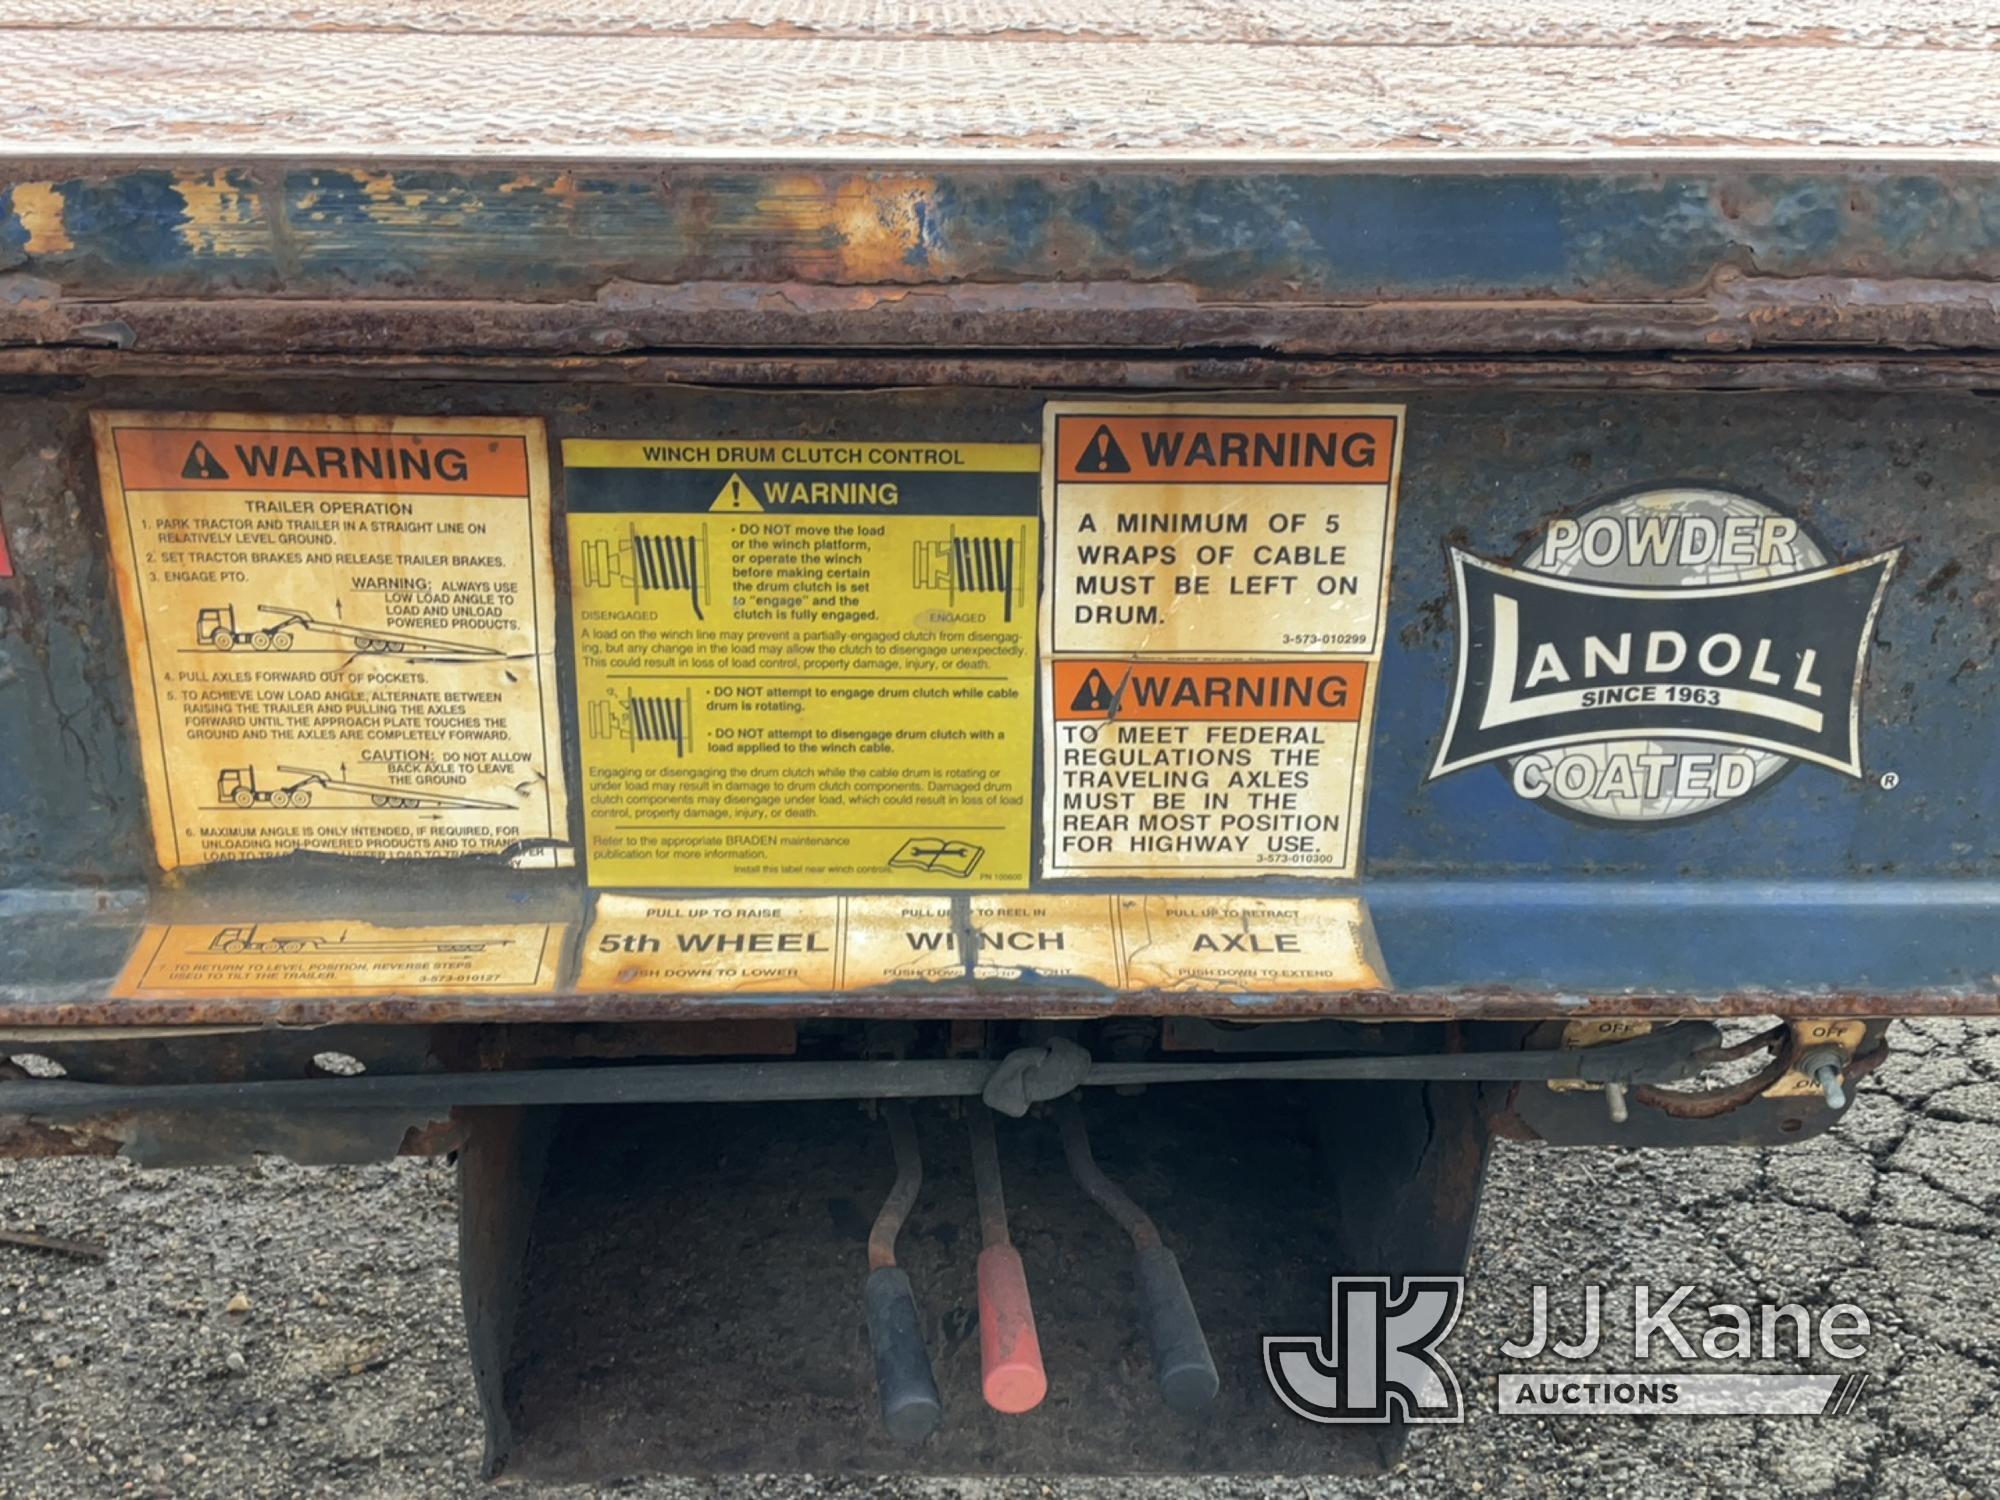 (South Beloit, IL) 2012 Landoll 330C S/A Traveling Axle Container Trailer Condition Unknown